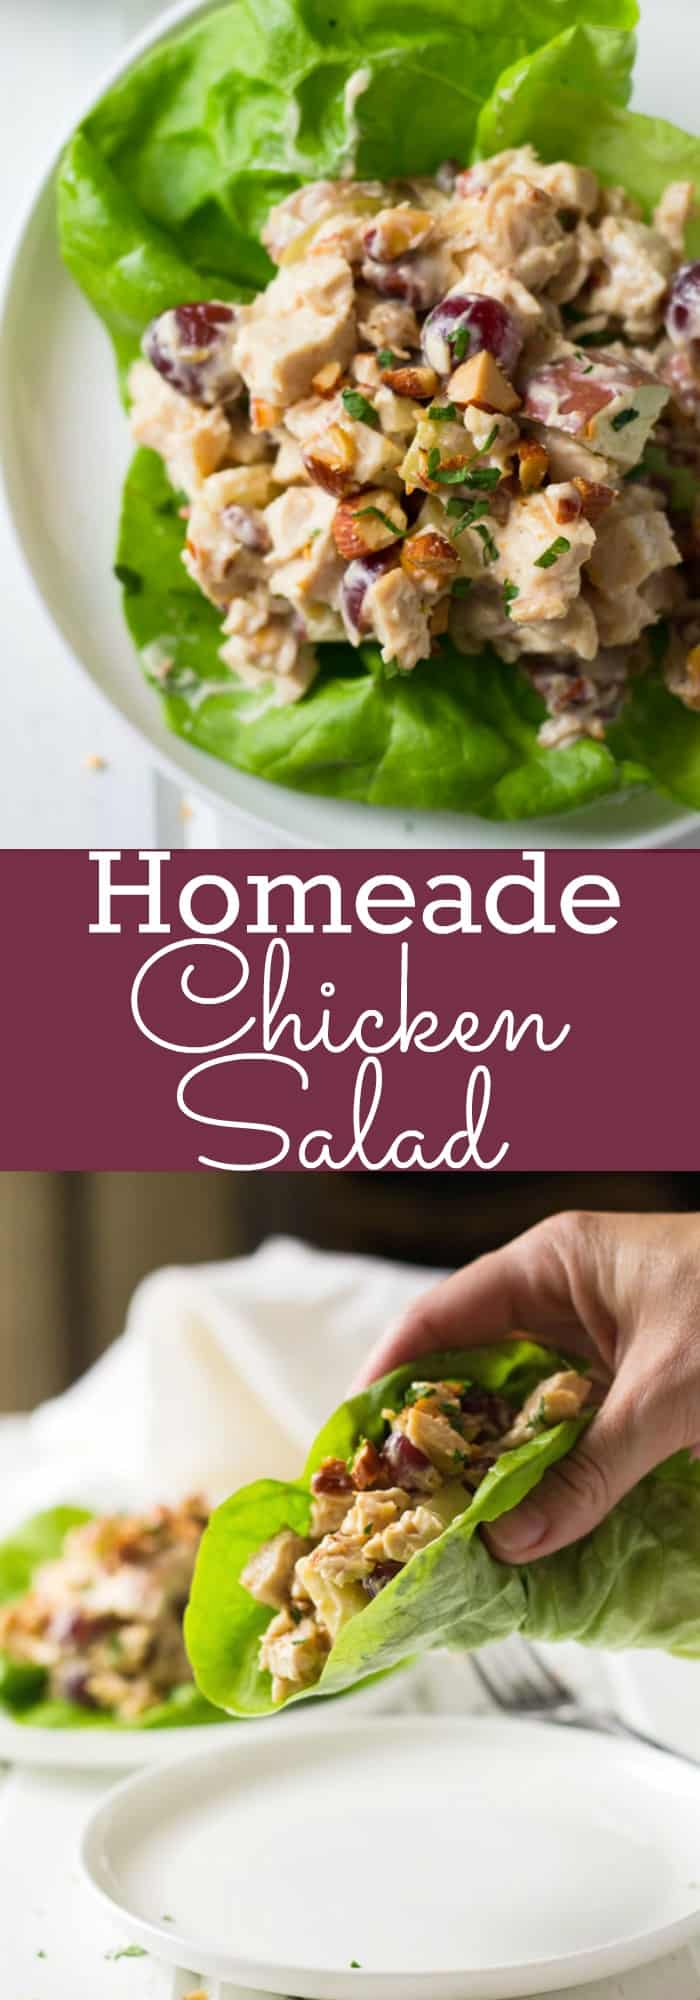 This Homemade Chicken Salad is not your average one! Full of crunchy fruits and veggies and a special ingredient!